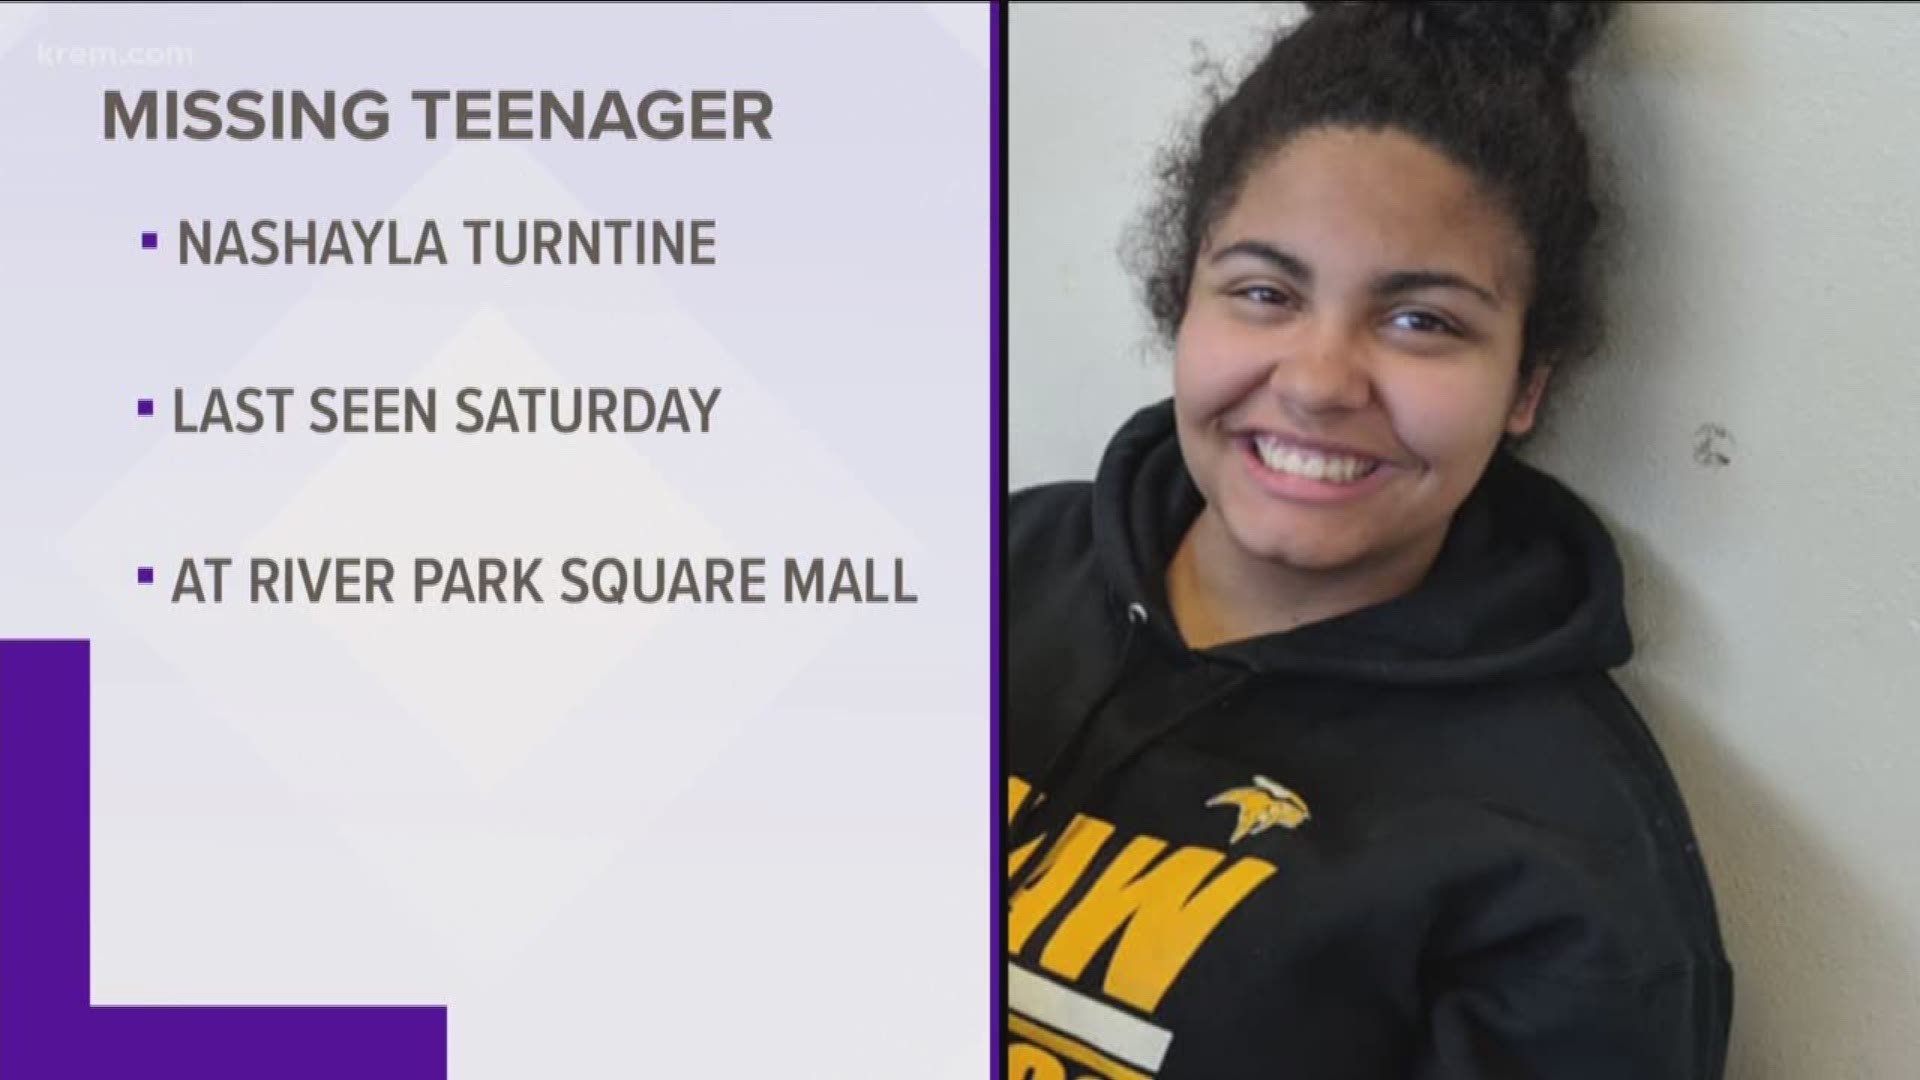 Police say Nashayla Turntine was last seen at the River Park Square Mall on Saturday afternoon.